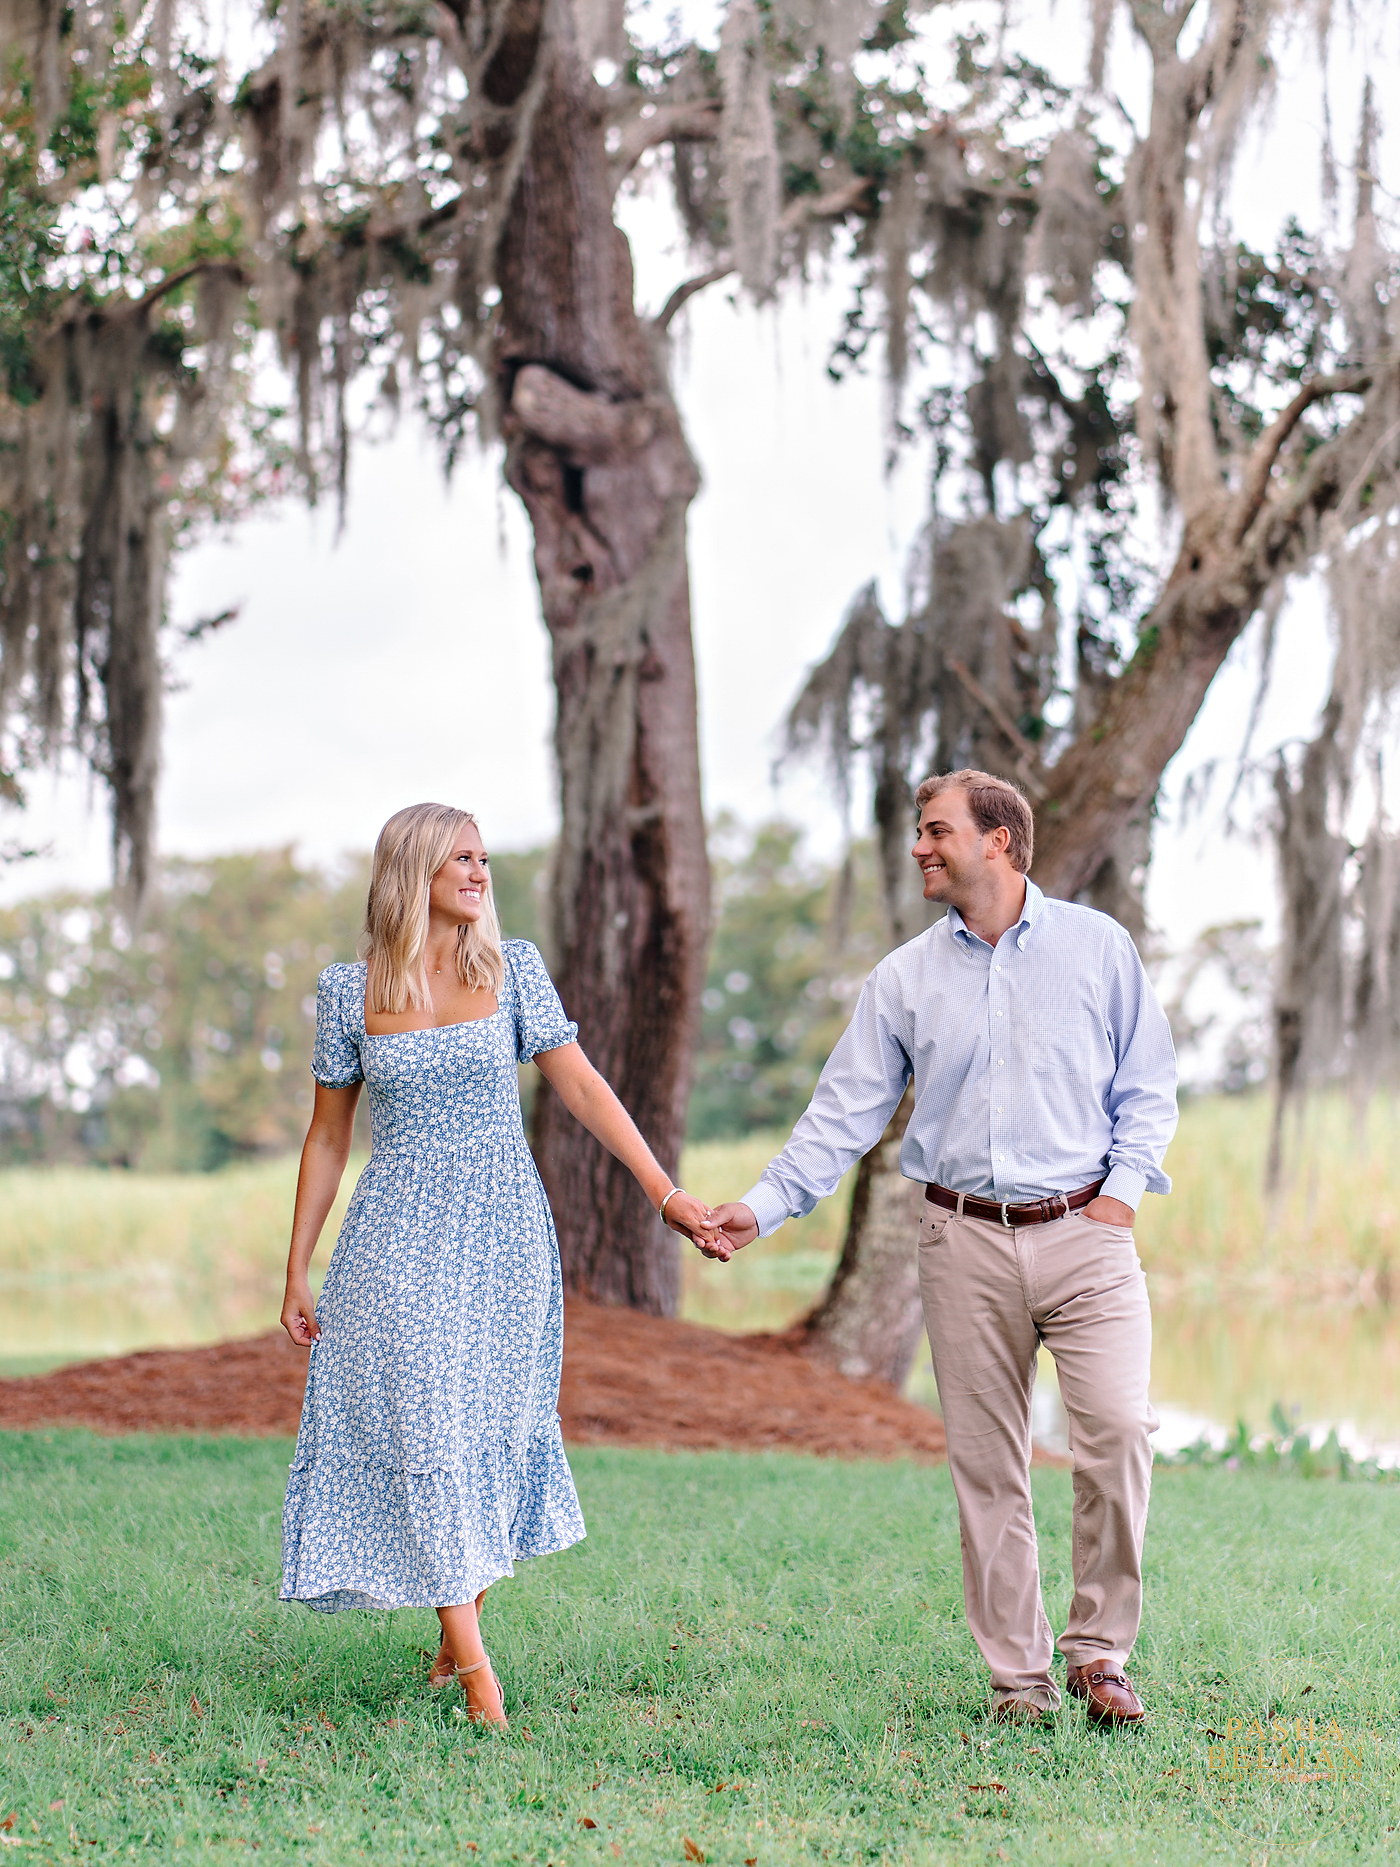 The Best Pawleys Island SC Engagement Photography Location